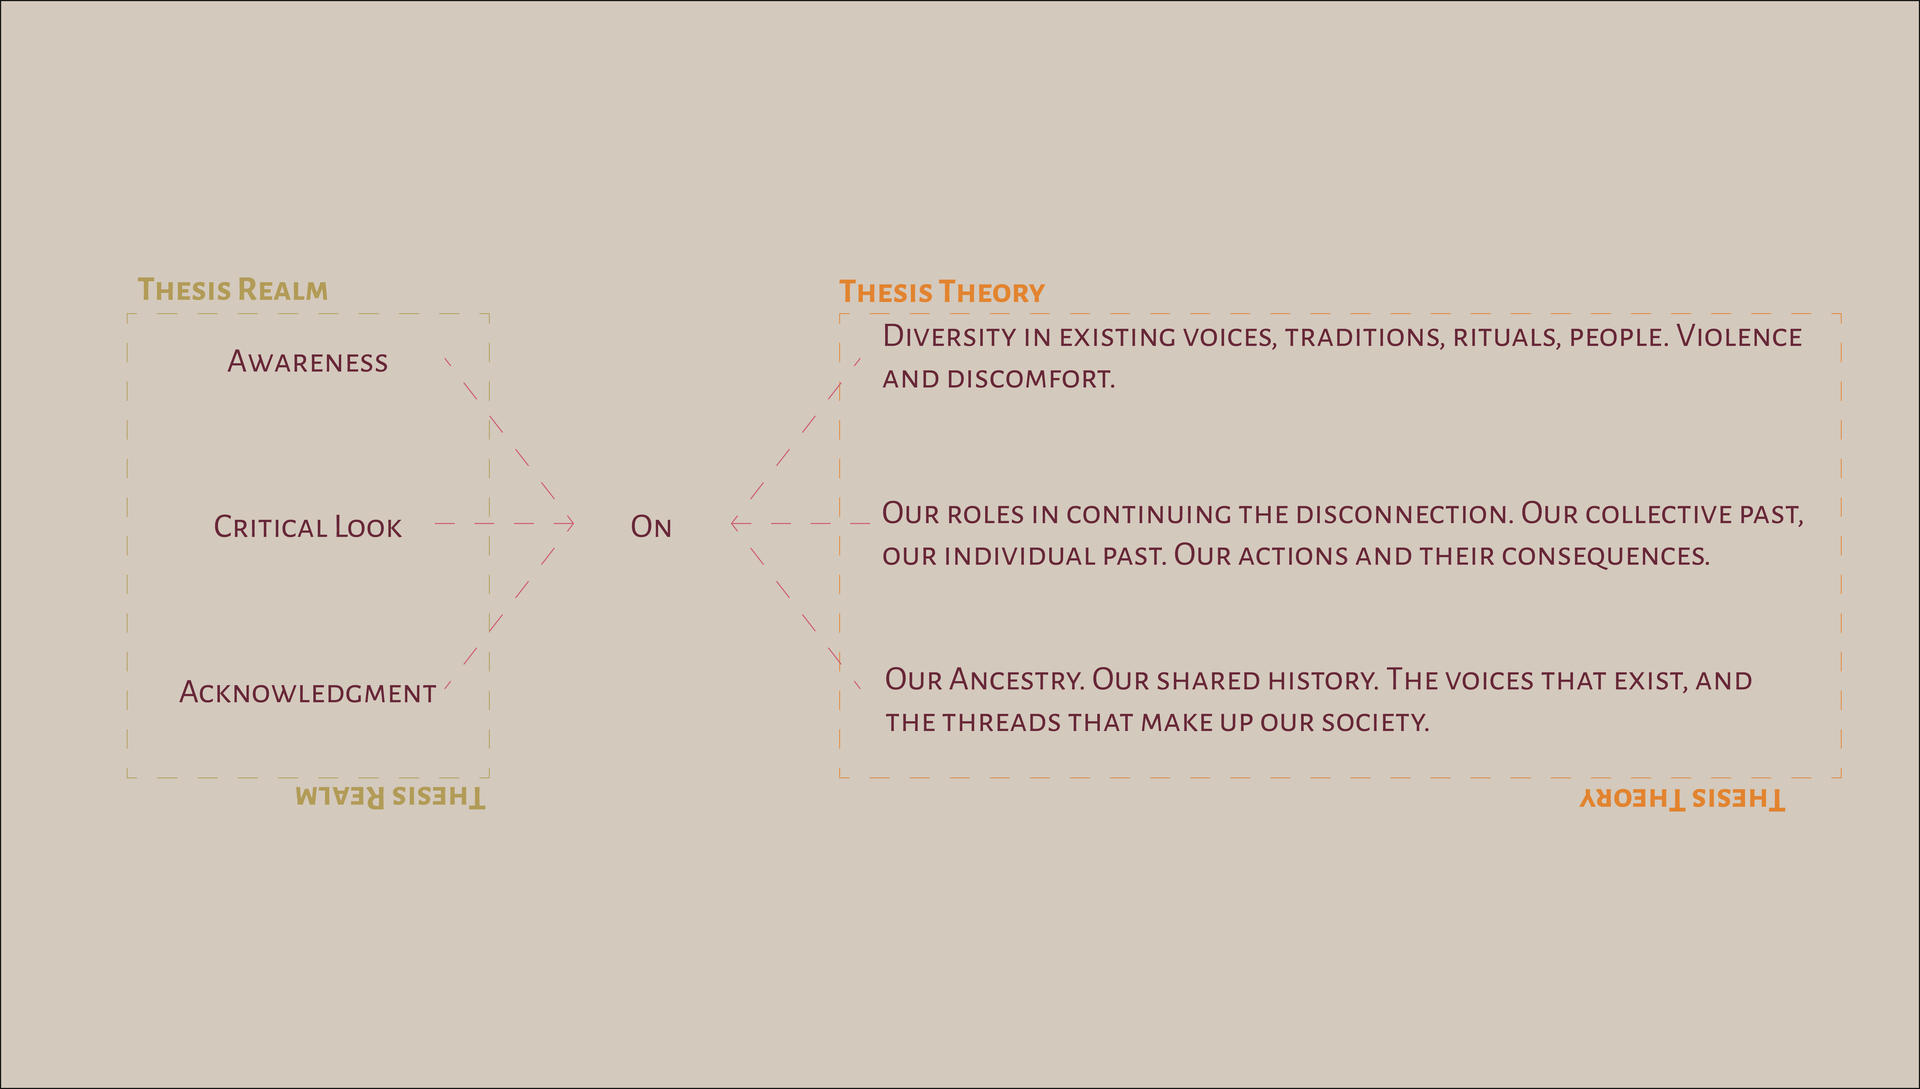 A diagram depicting the theory of change of the thesis project.